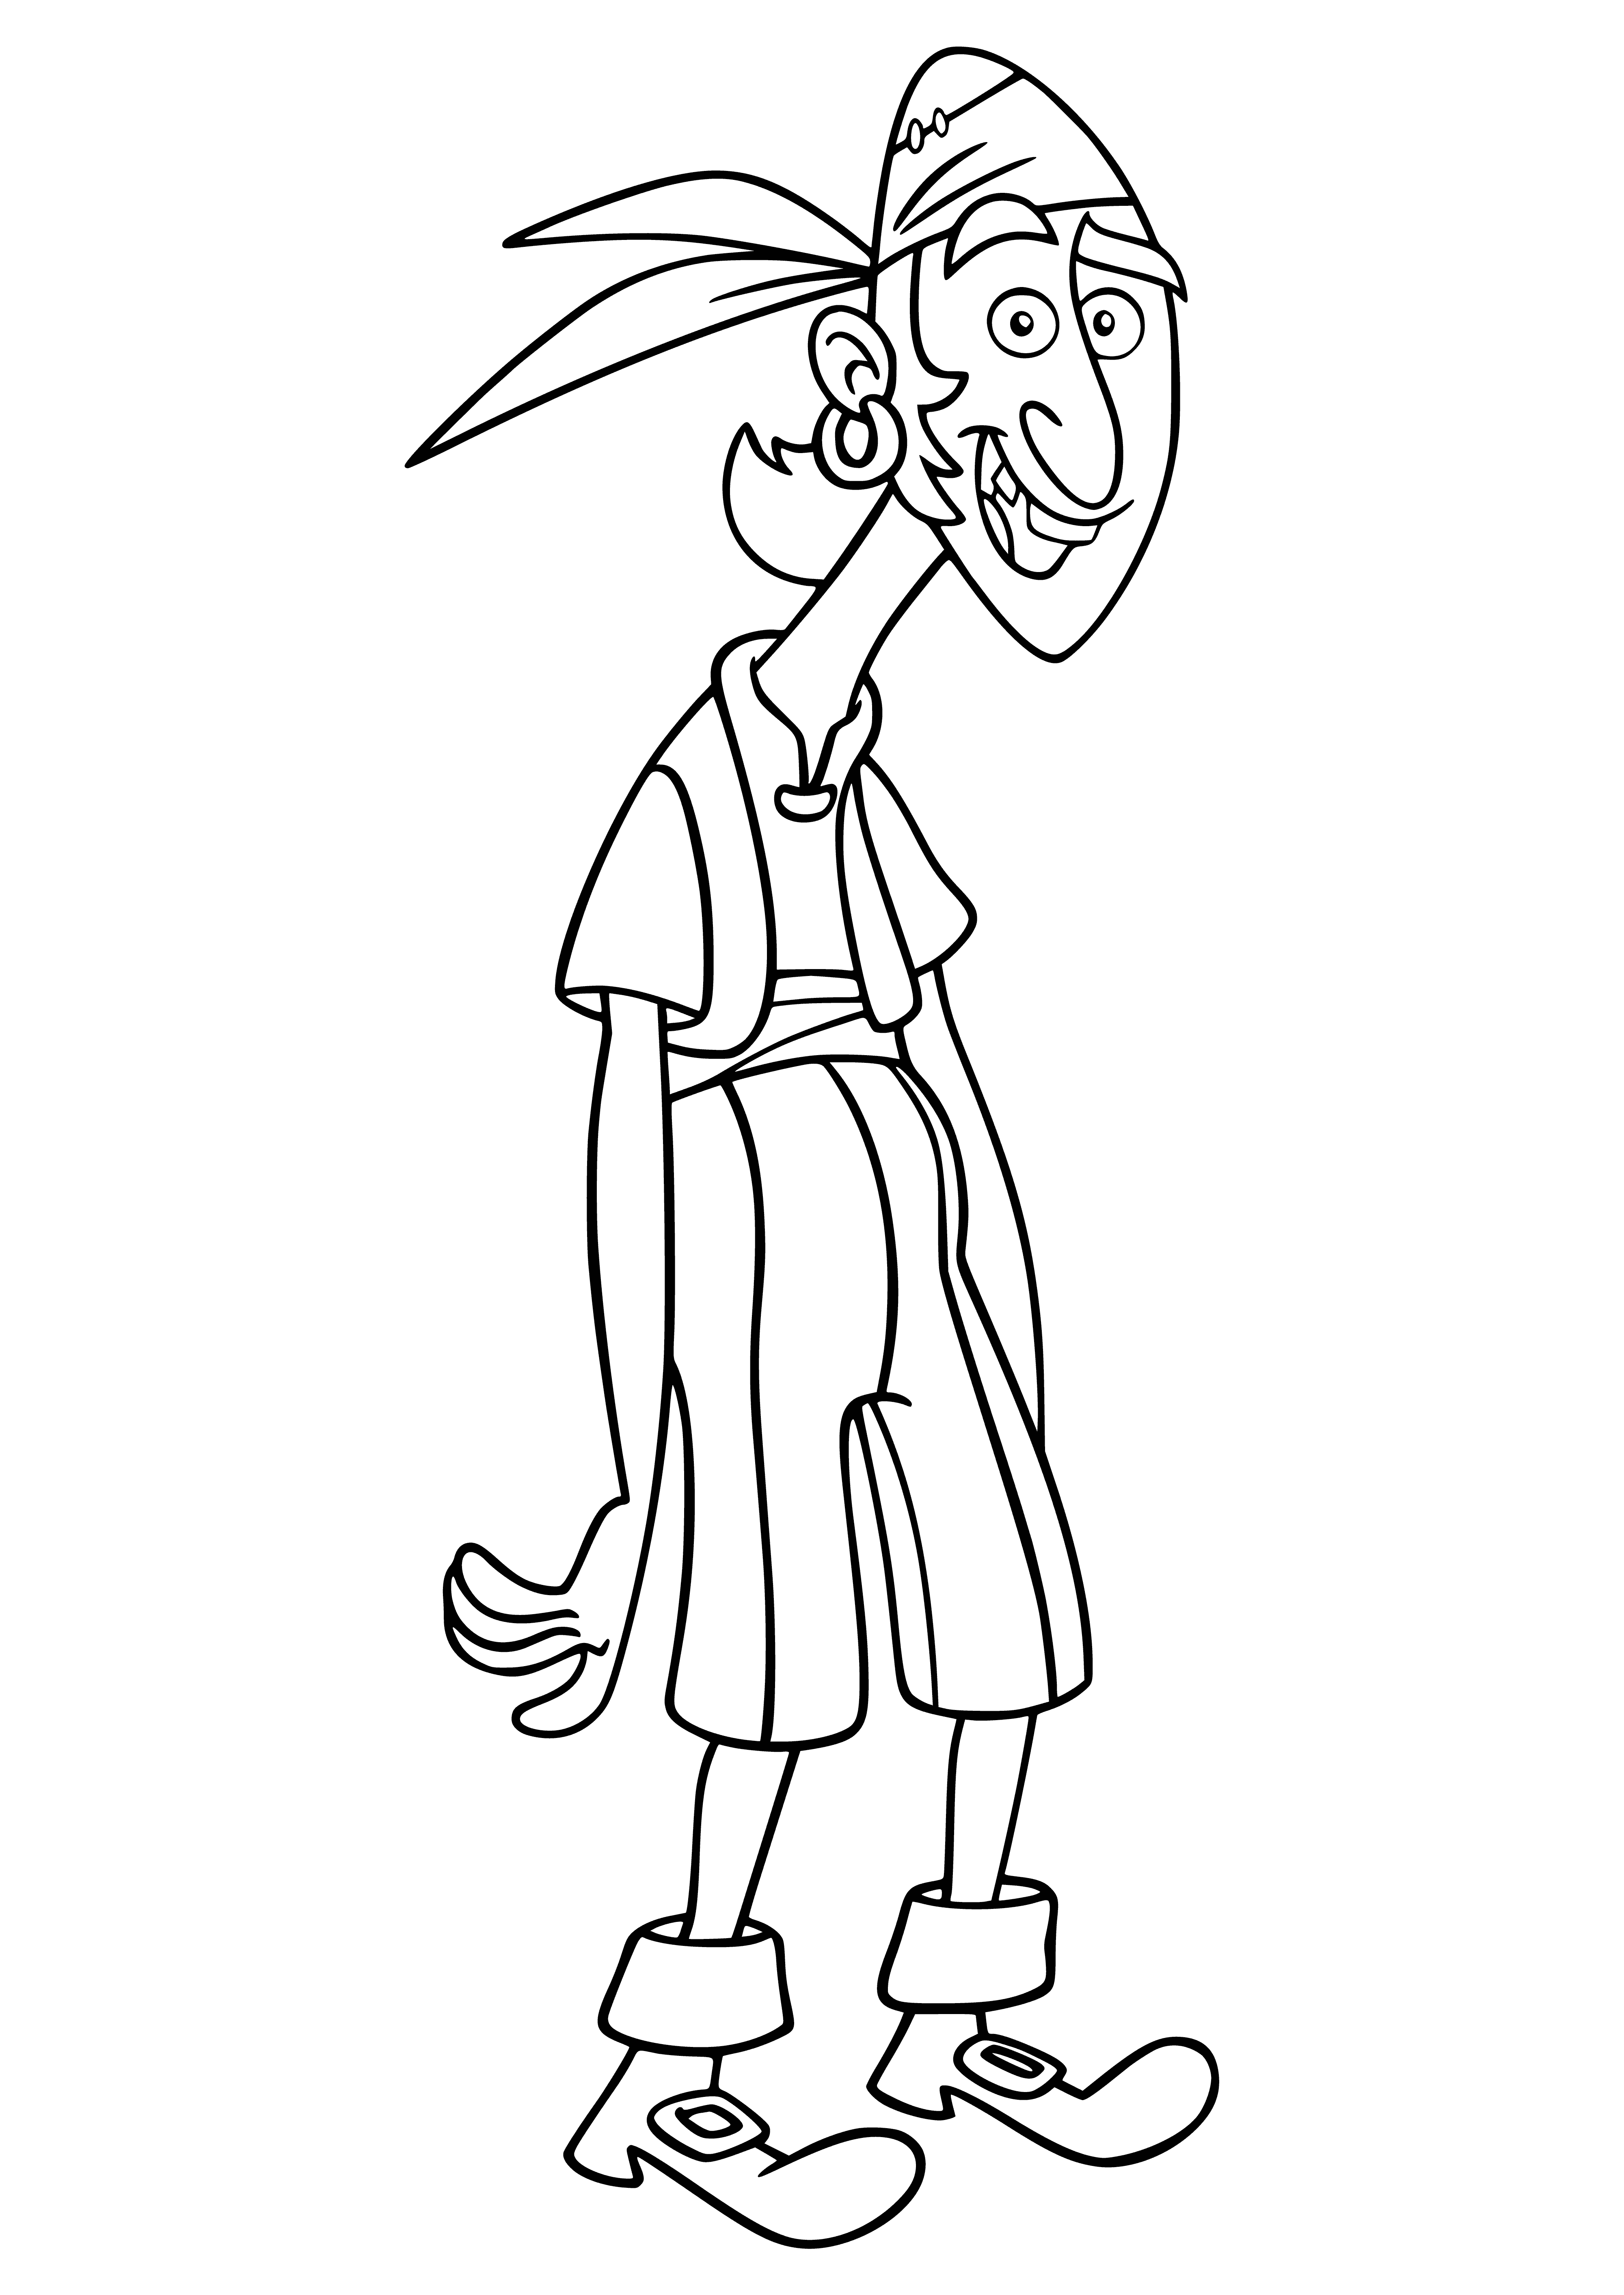 Pirate Bons coloring page